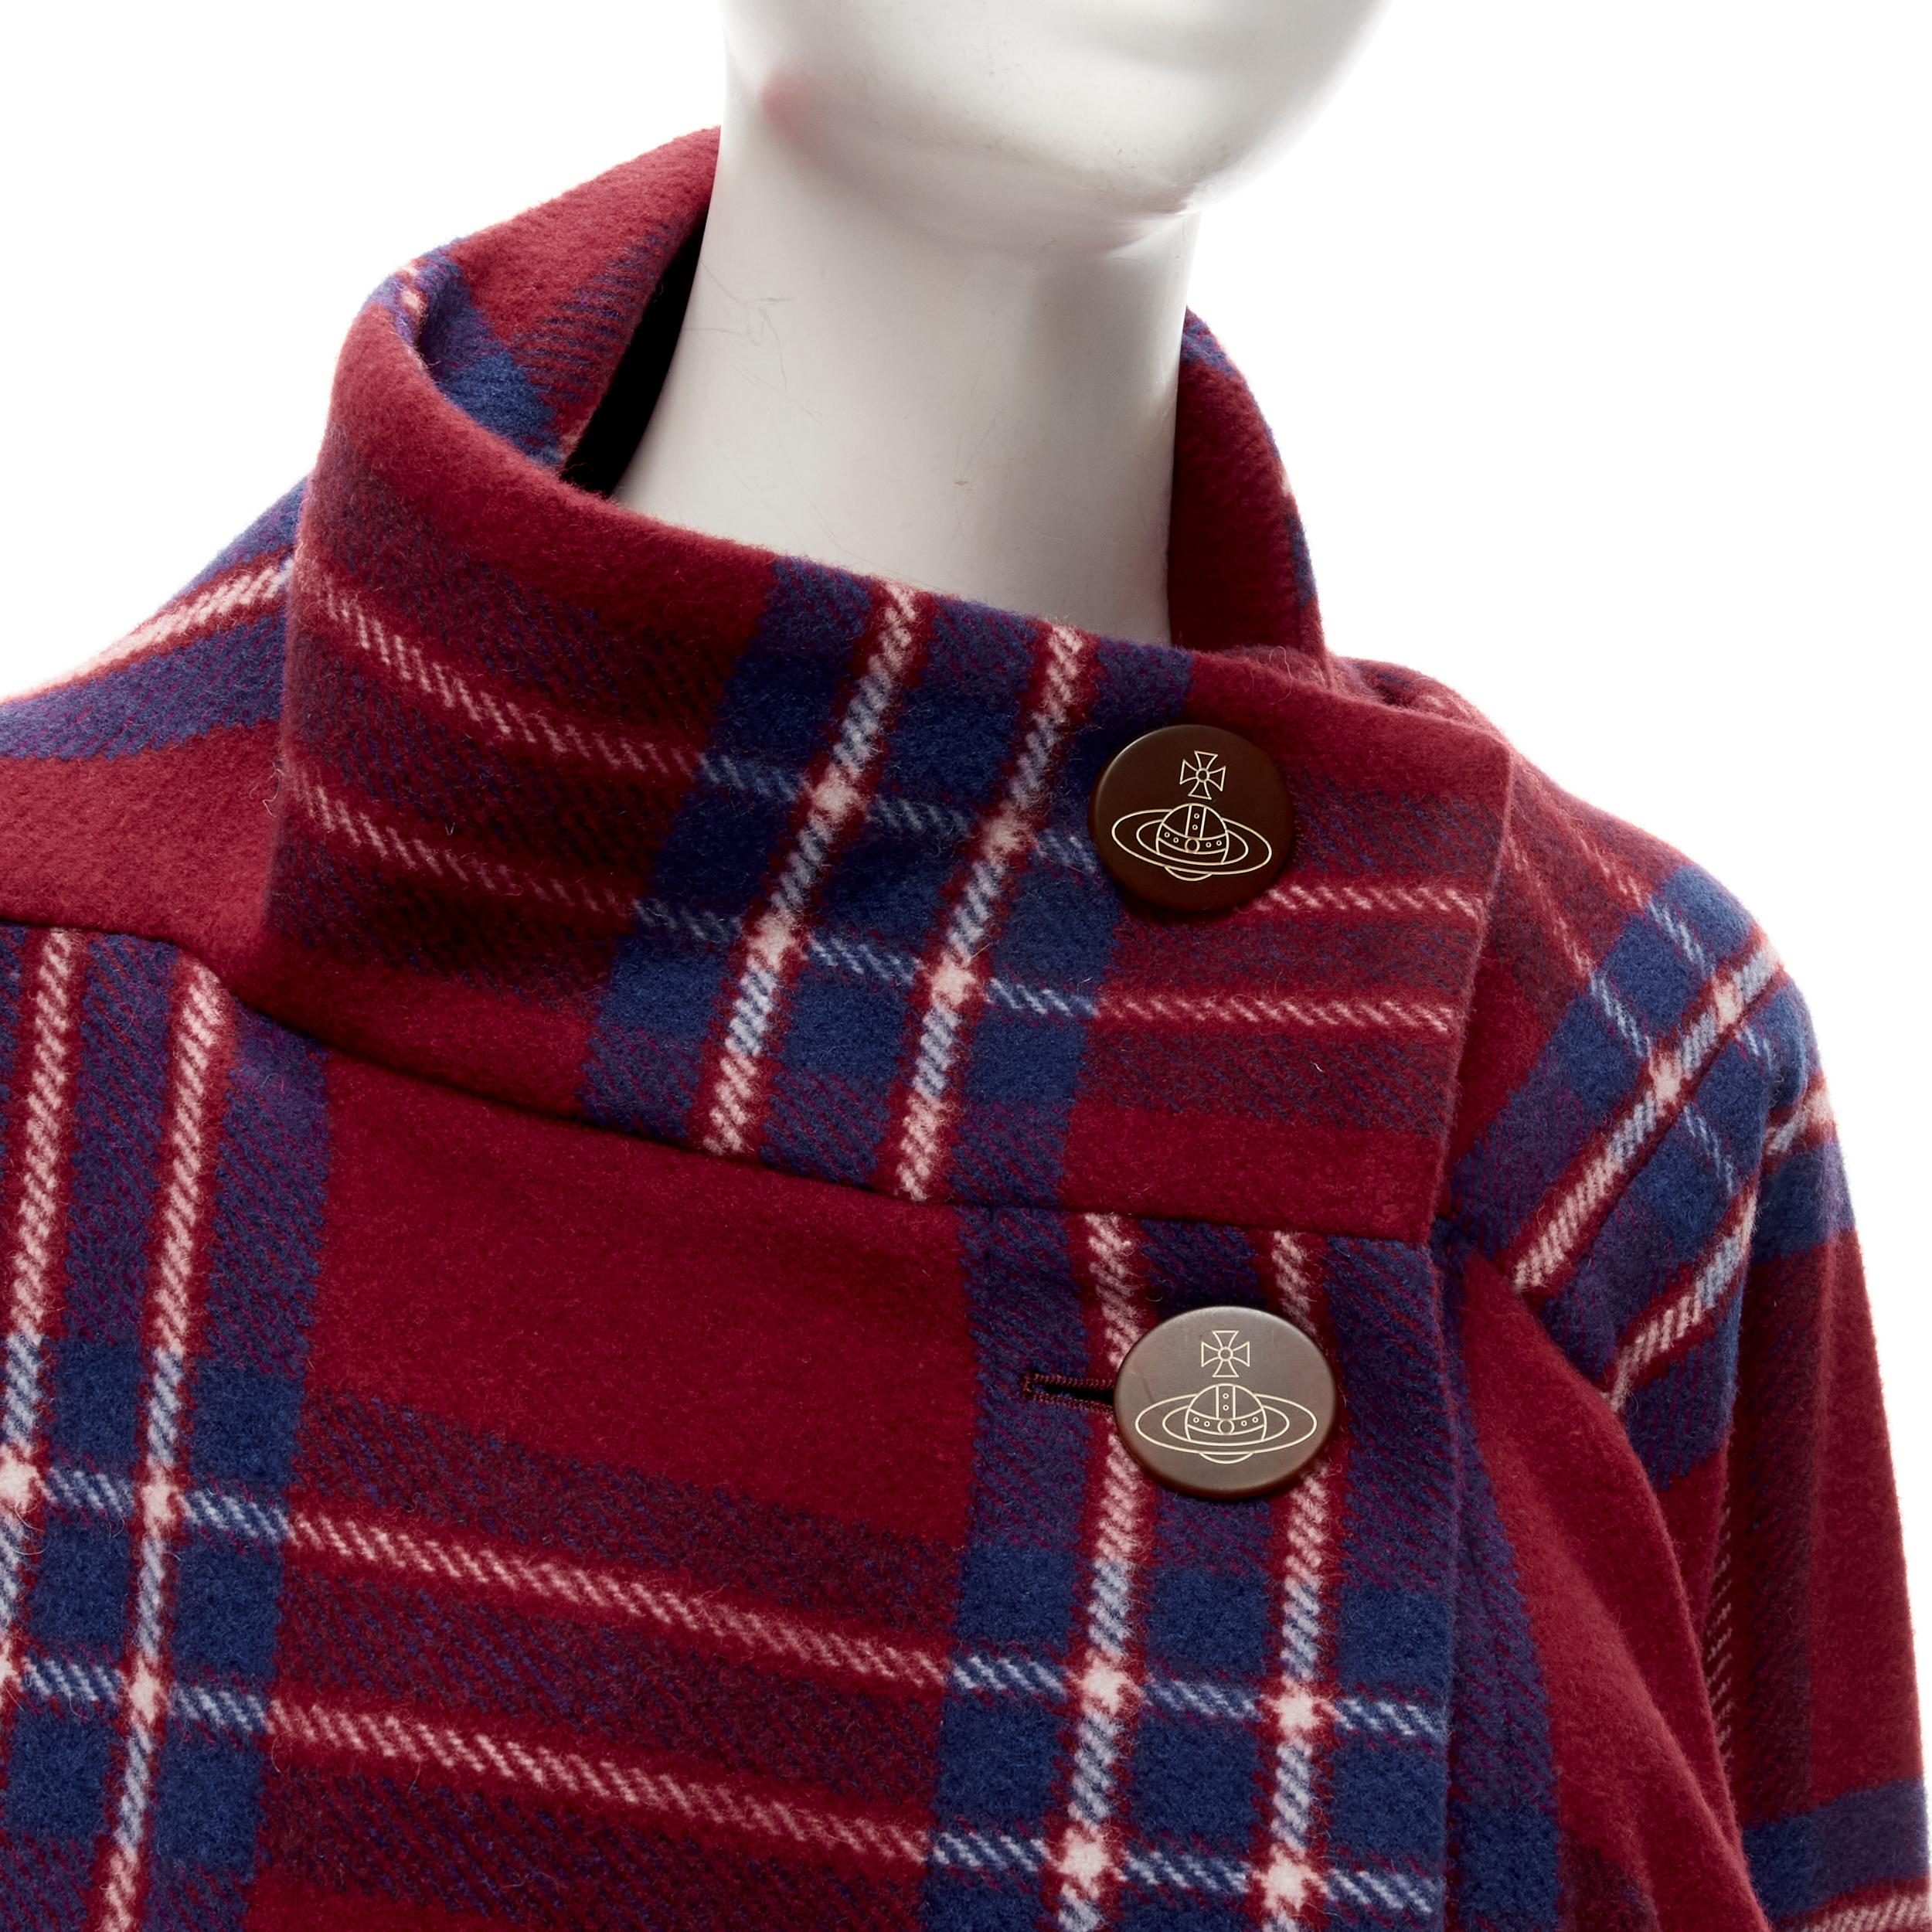 VIVIENNE WESTWOOD RED LABEL red blue wool plaid orb logo button cape US00 XXS
Reference: TGAS/C01759
Brand: Vivienne Westwood
Designer: Vivienne Westwood
Collection: Red Label
Material: Wool, Blend
Color: Red
Pattern: Plaid
Closure: Button
Made in: